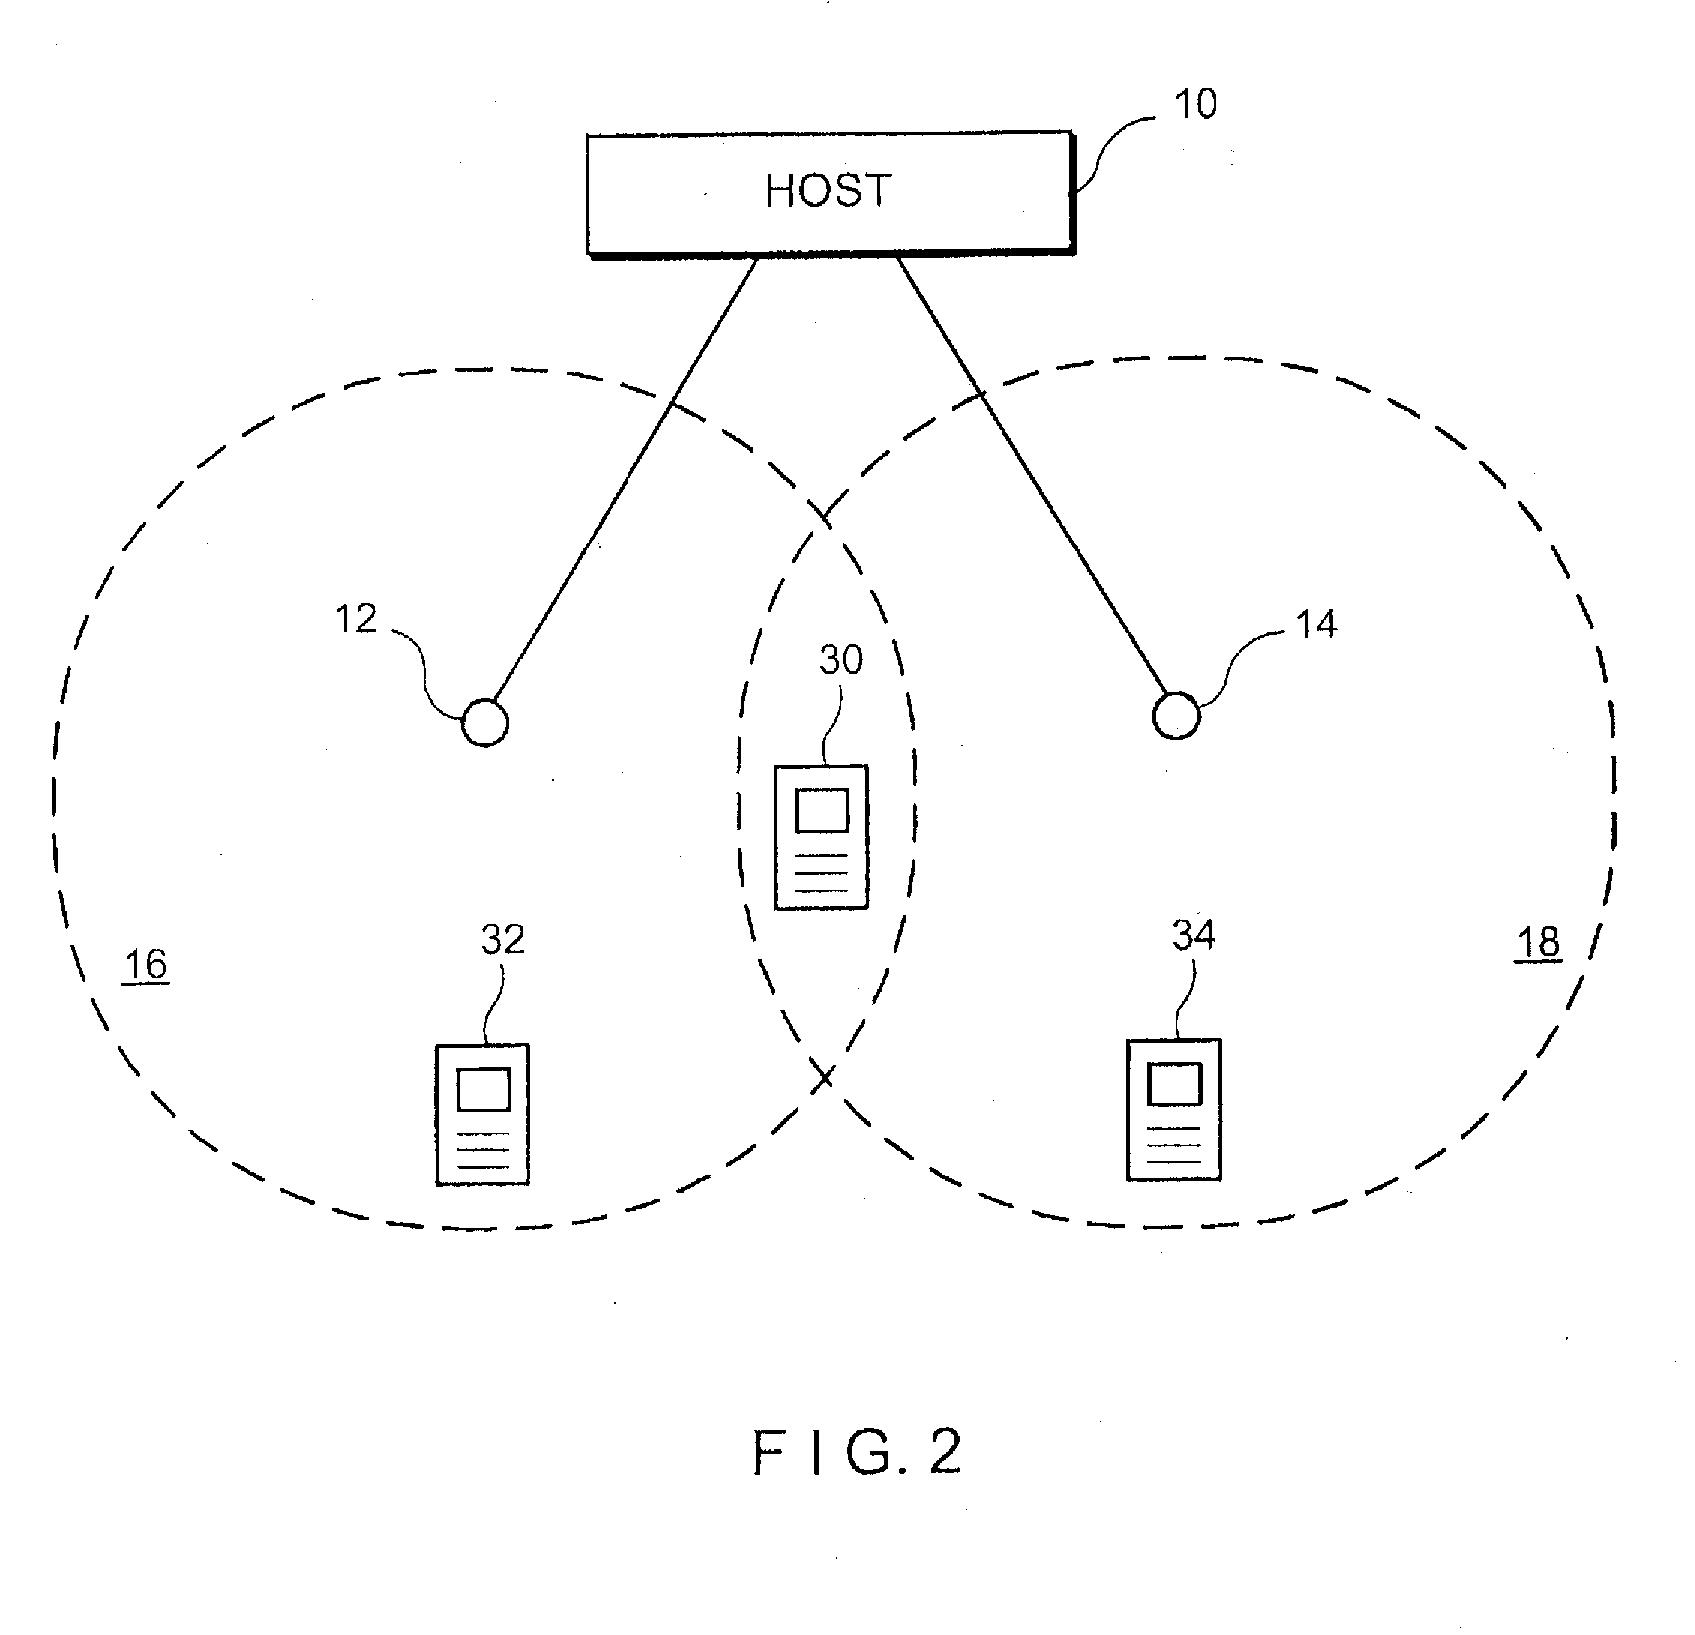 Apparatus and Method for Wireless Local Area Networks of Different Countries